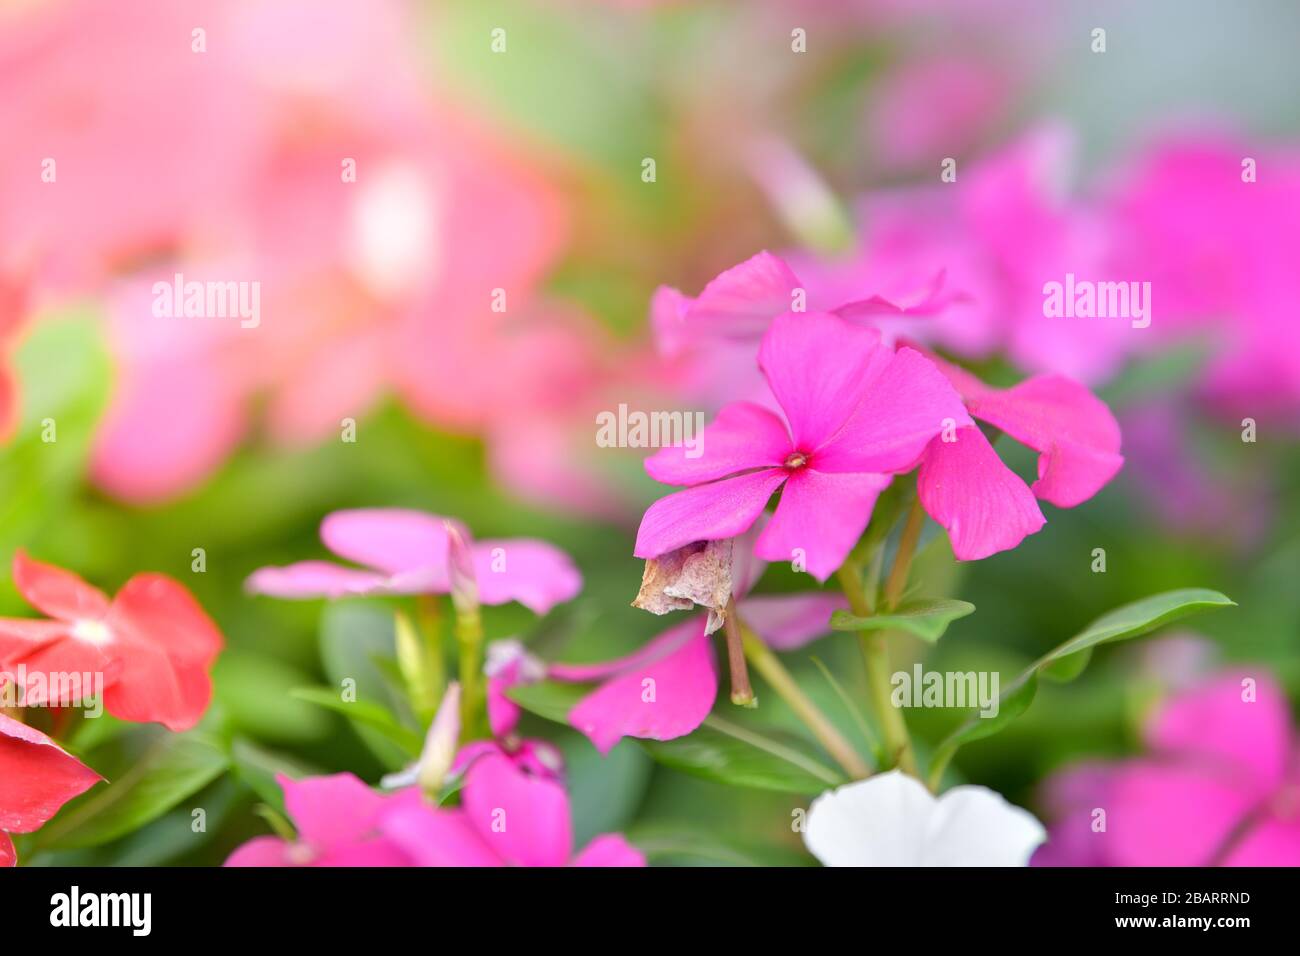 Rose periwinkle, Old maid, Madagascar Periwinkle, in garden. Stock Photo